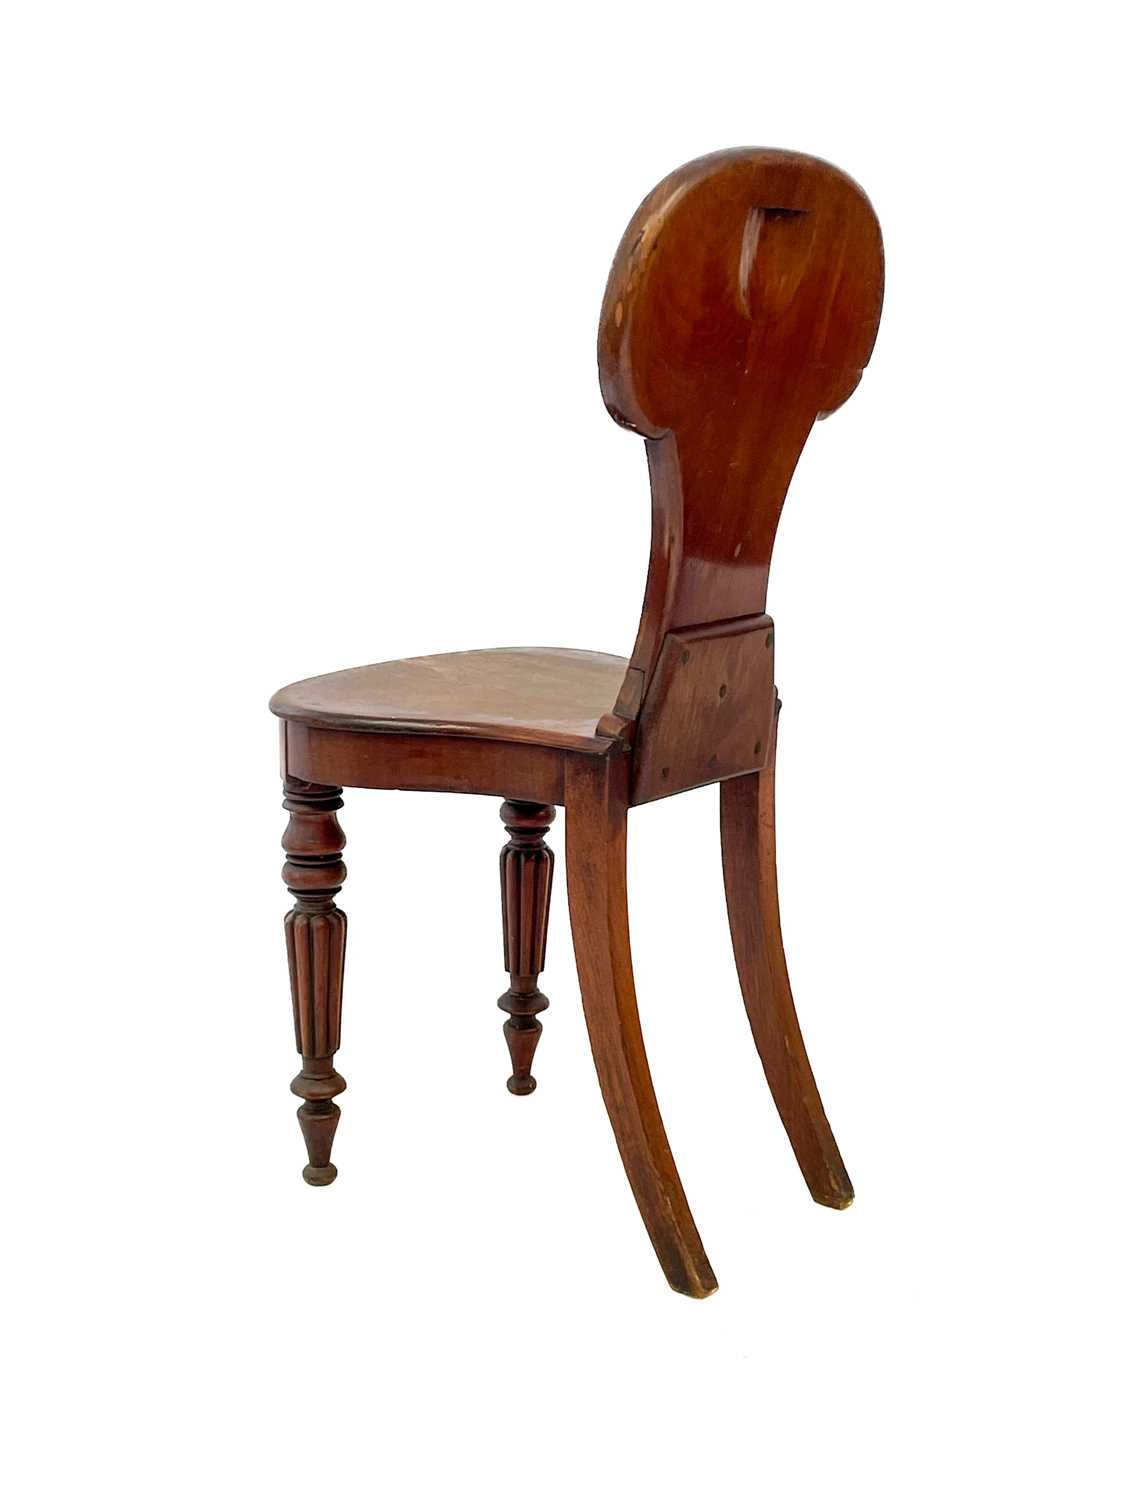 A late Victorian walnut swivel chair, on a cast iron base. - Image 4 of 6